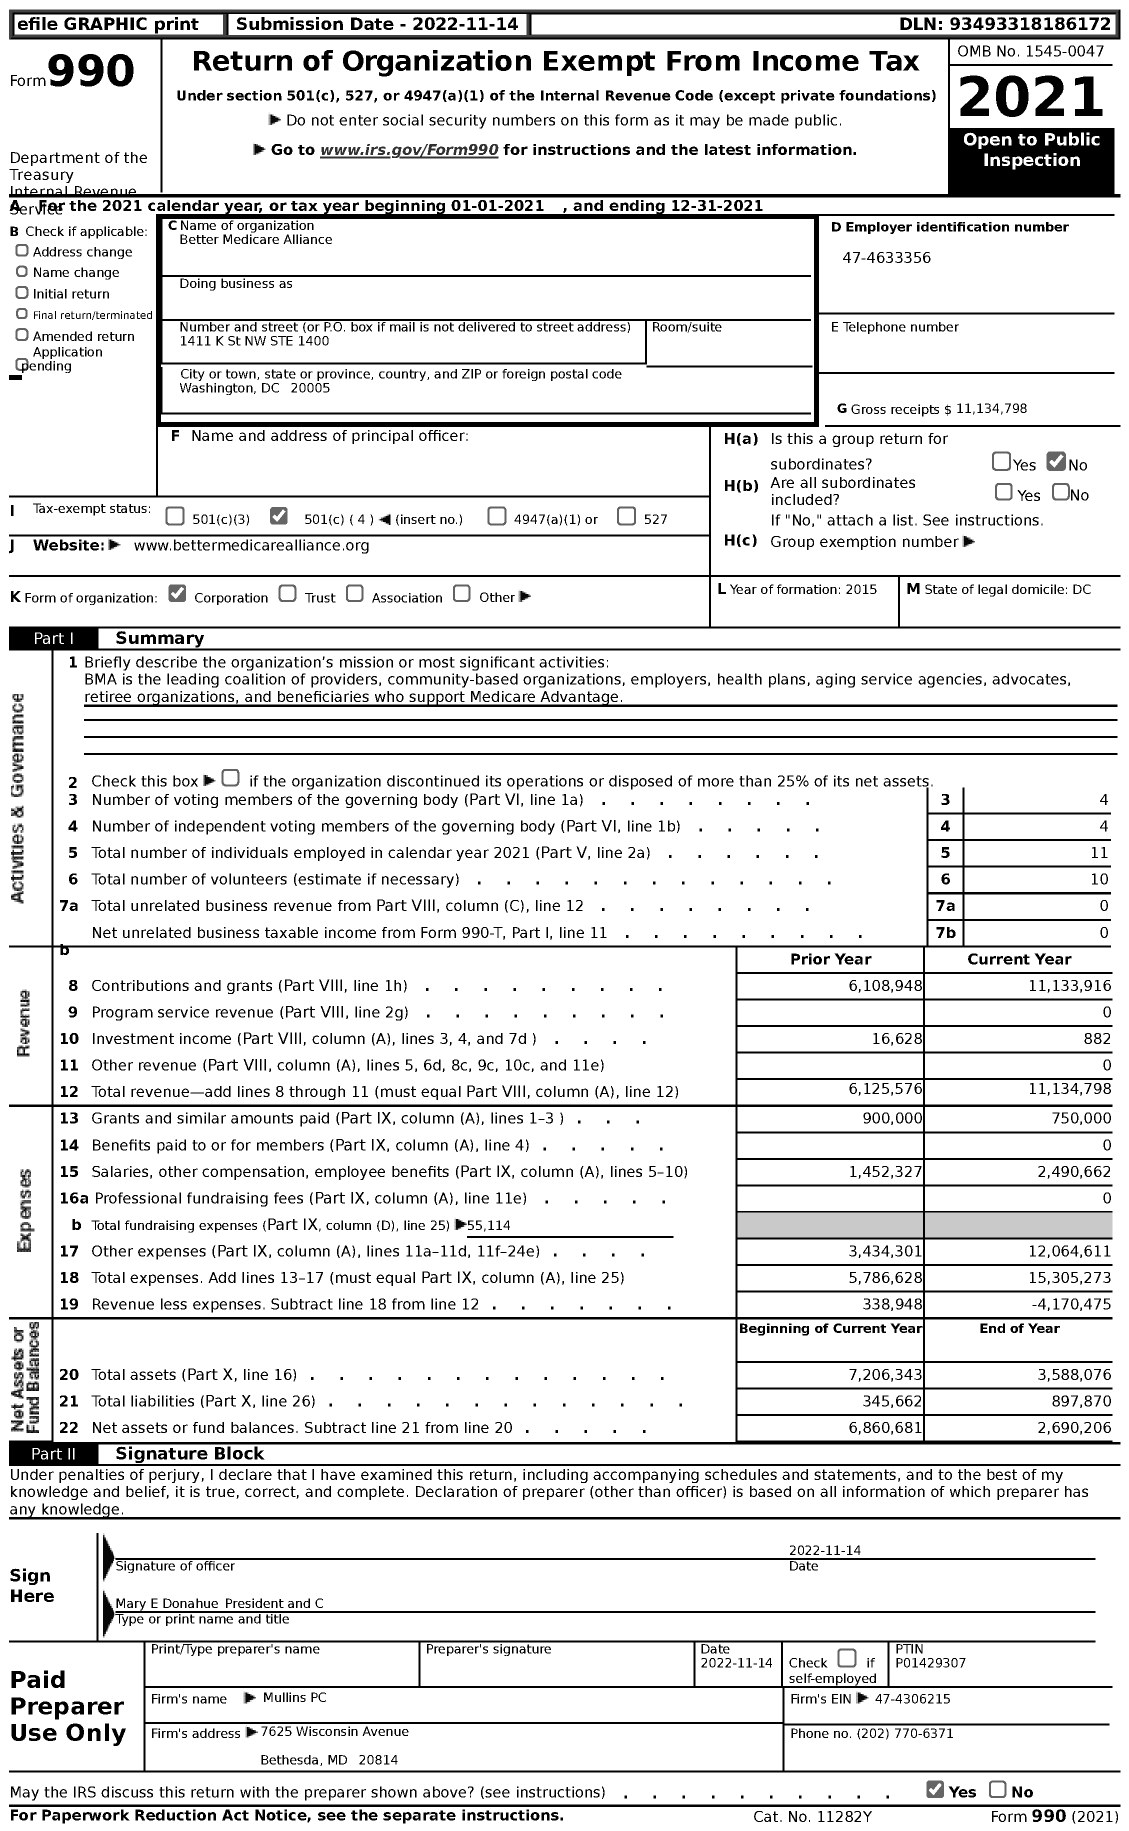 Image of first page of 2021 Form 990 for Better Medicare Alliance (BMA)